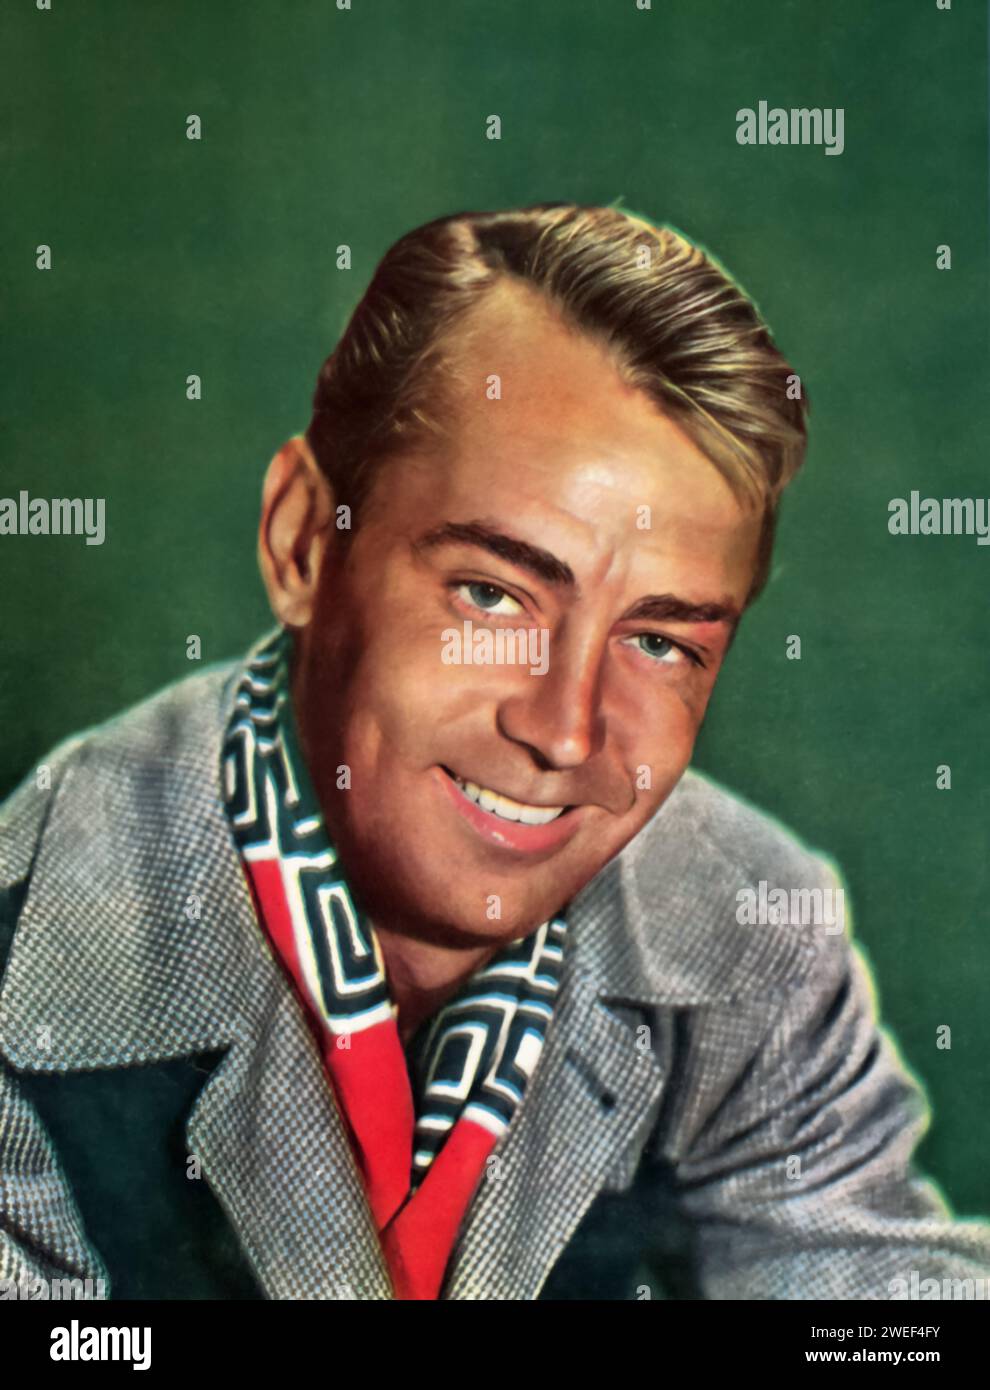 Alan Ladd stars in 'The Great Gatsby' (1949), a film adaptation of F. Scott Fitzgerald's classic novel. In this version, Ladd portrays the enigmatic and wealthy Jay Gatsby, a man obsessed with the past and his lost love, Daisy Buchanan. Stock Photo